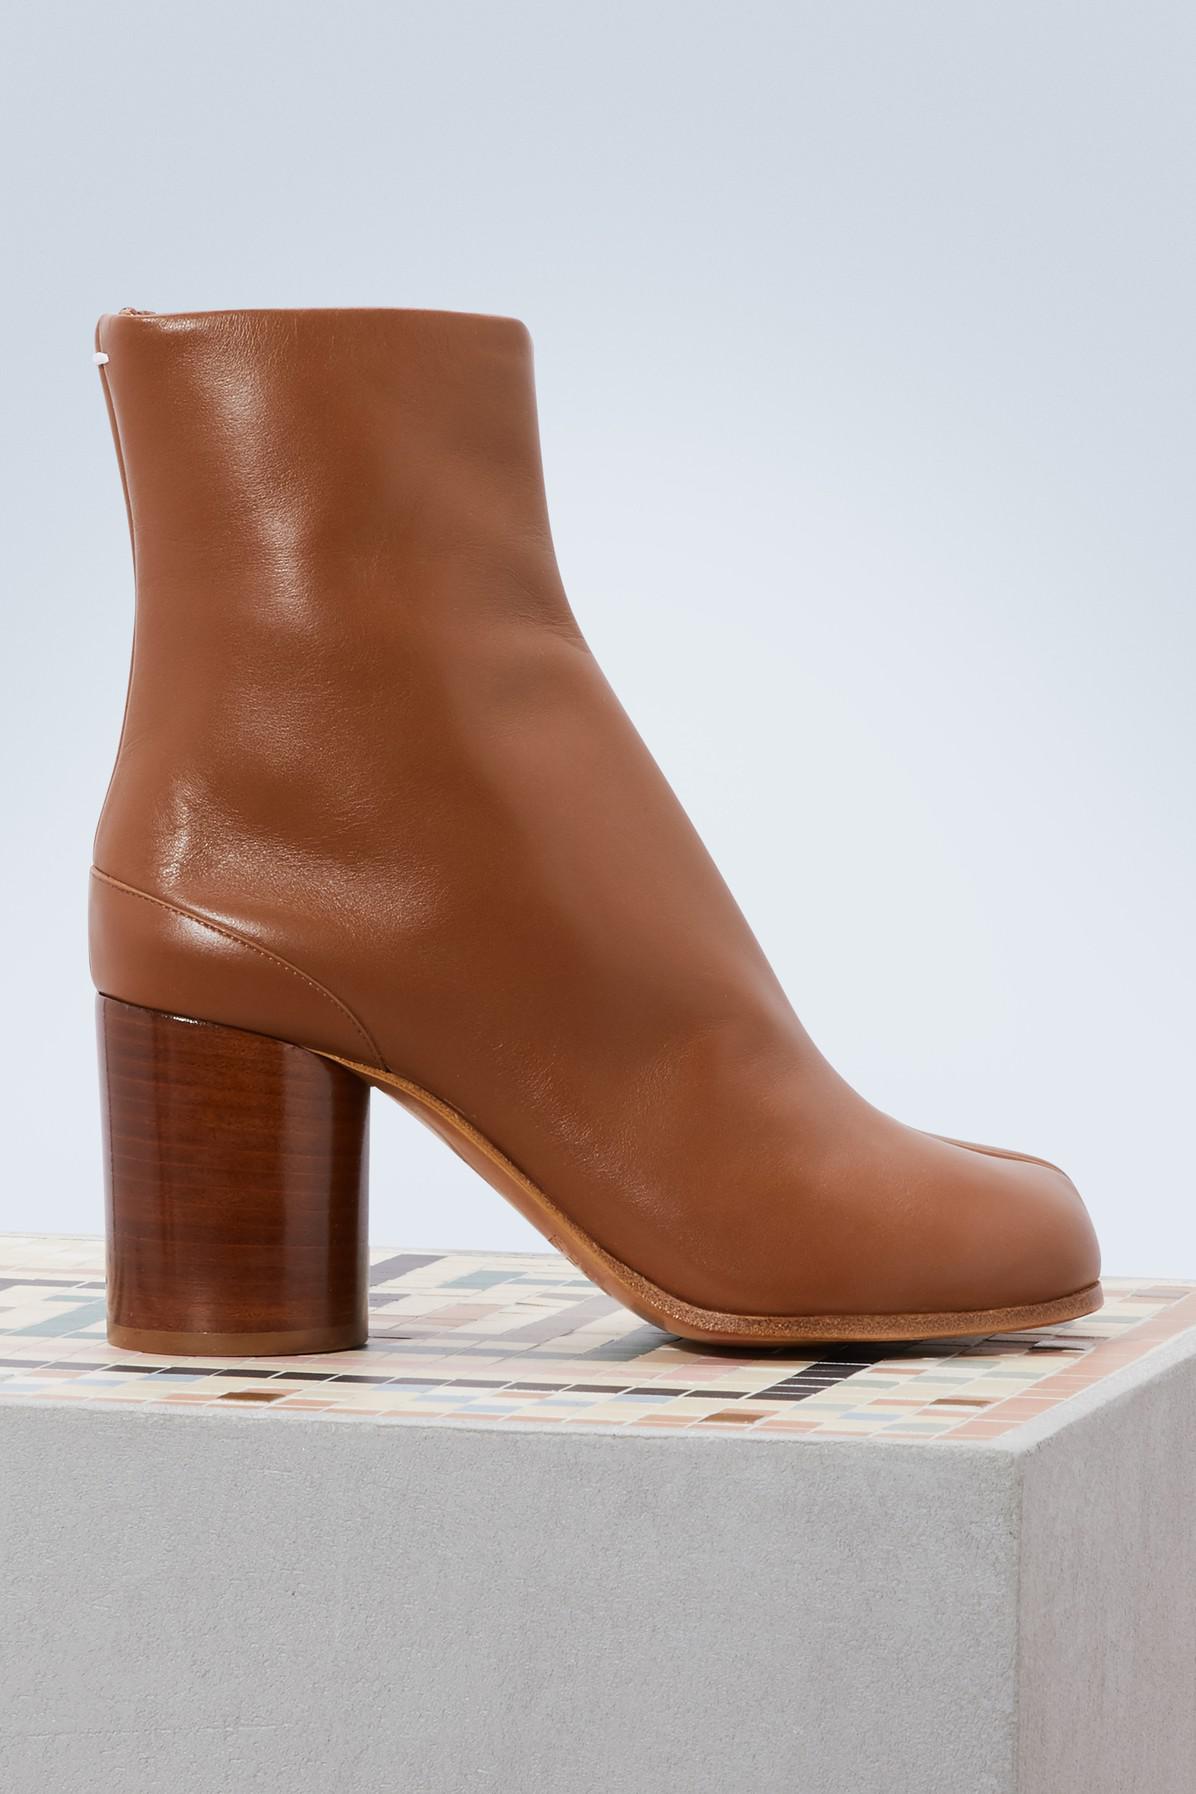 Maison Margiela Tabi Ankle Boots in Brown - Lyst